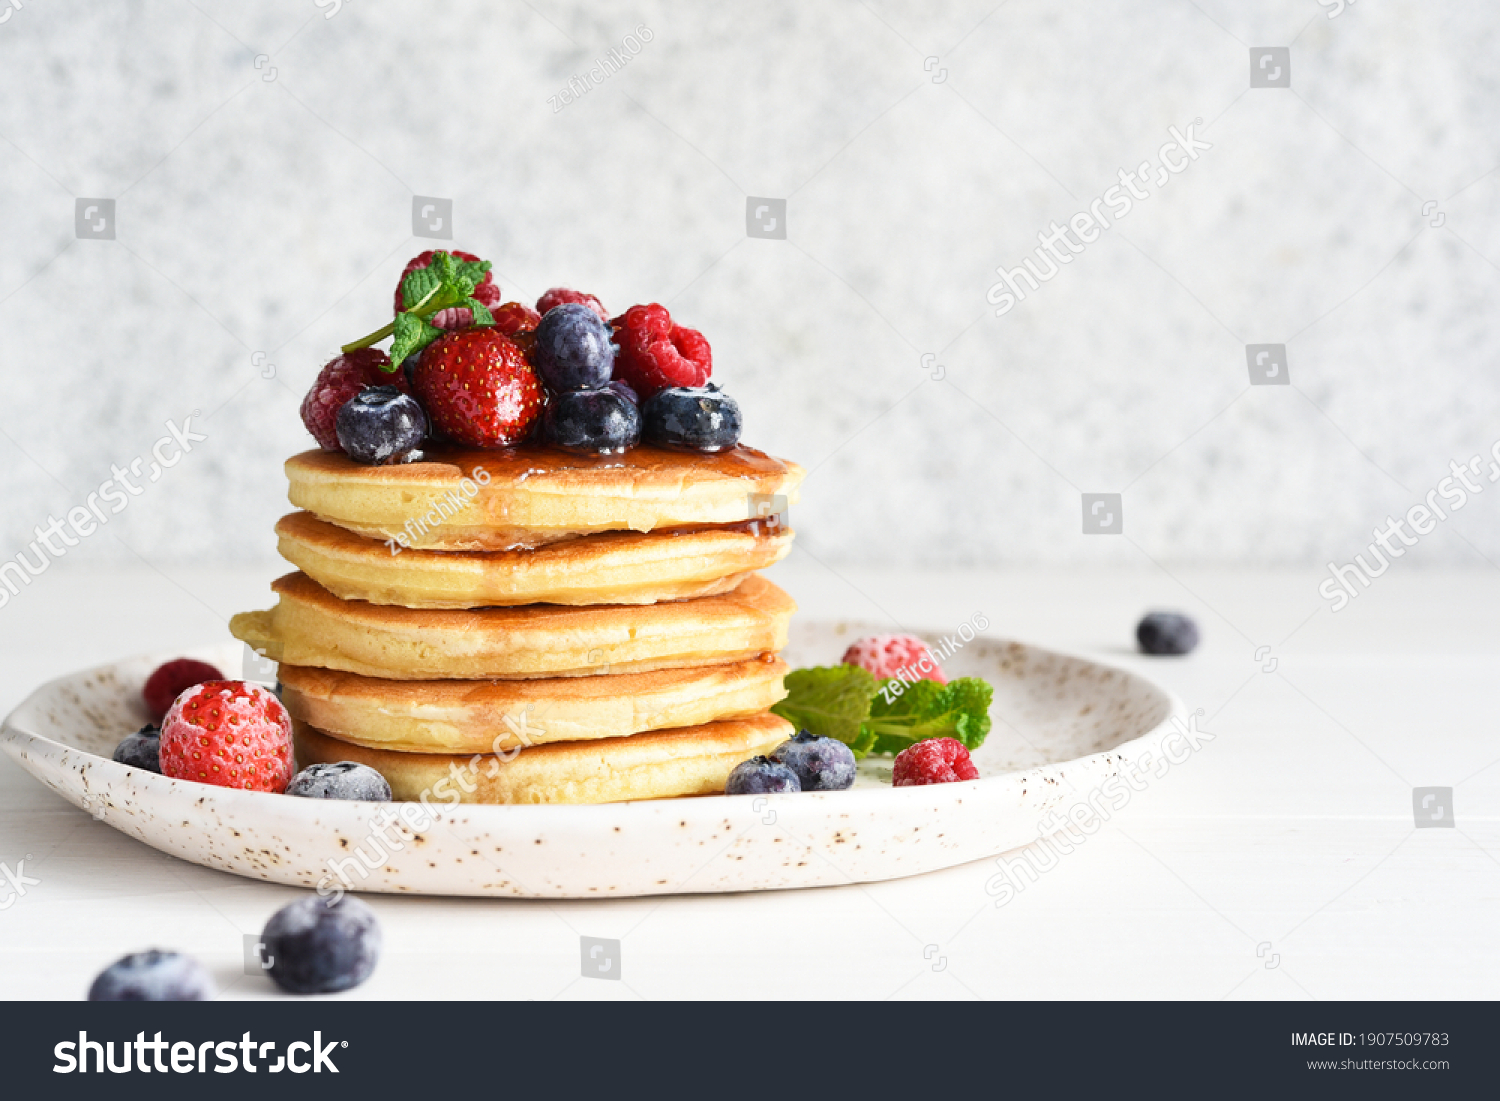 Pancakes with berries and maple syrup for breakfast on a light background. #1907509783